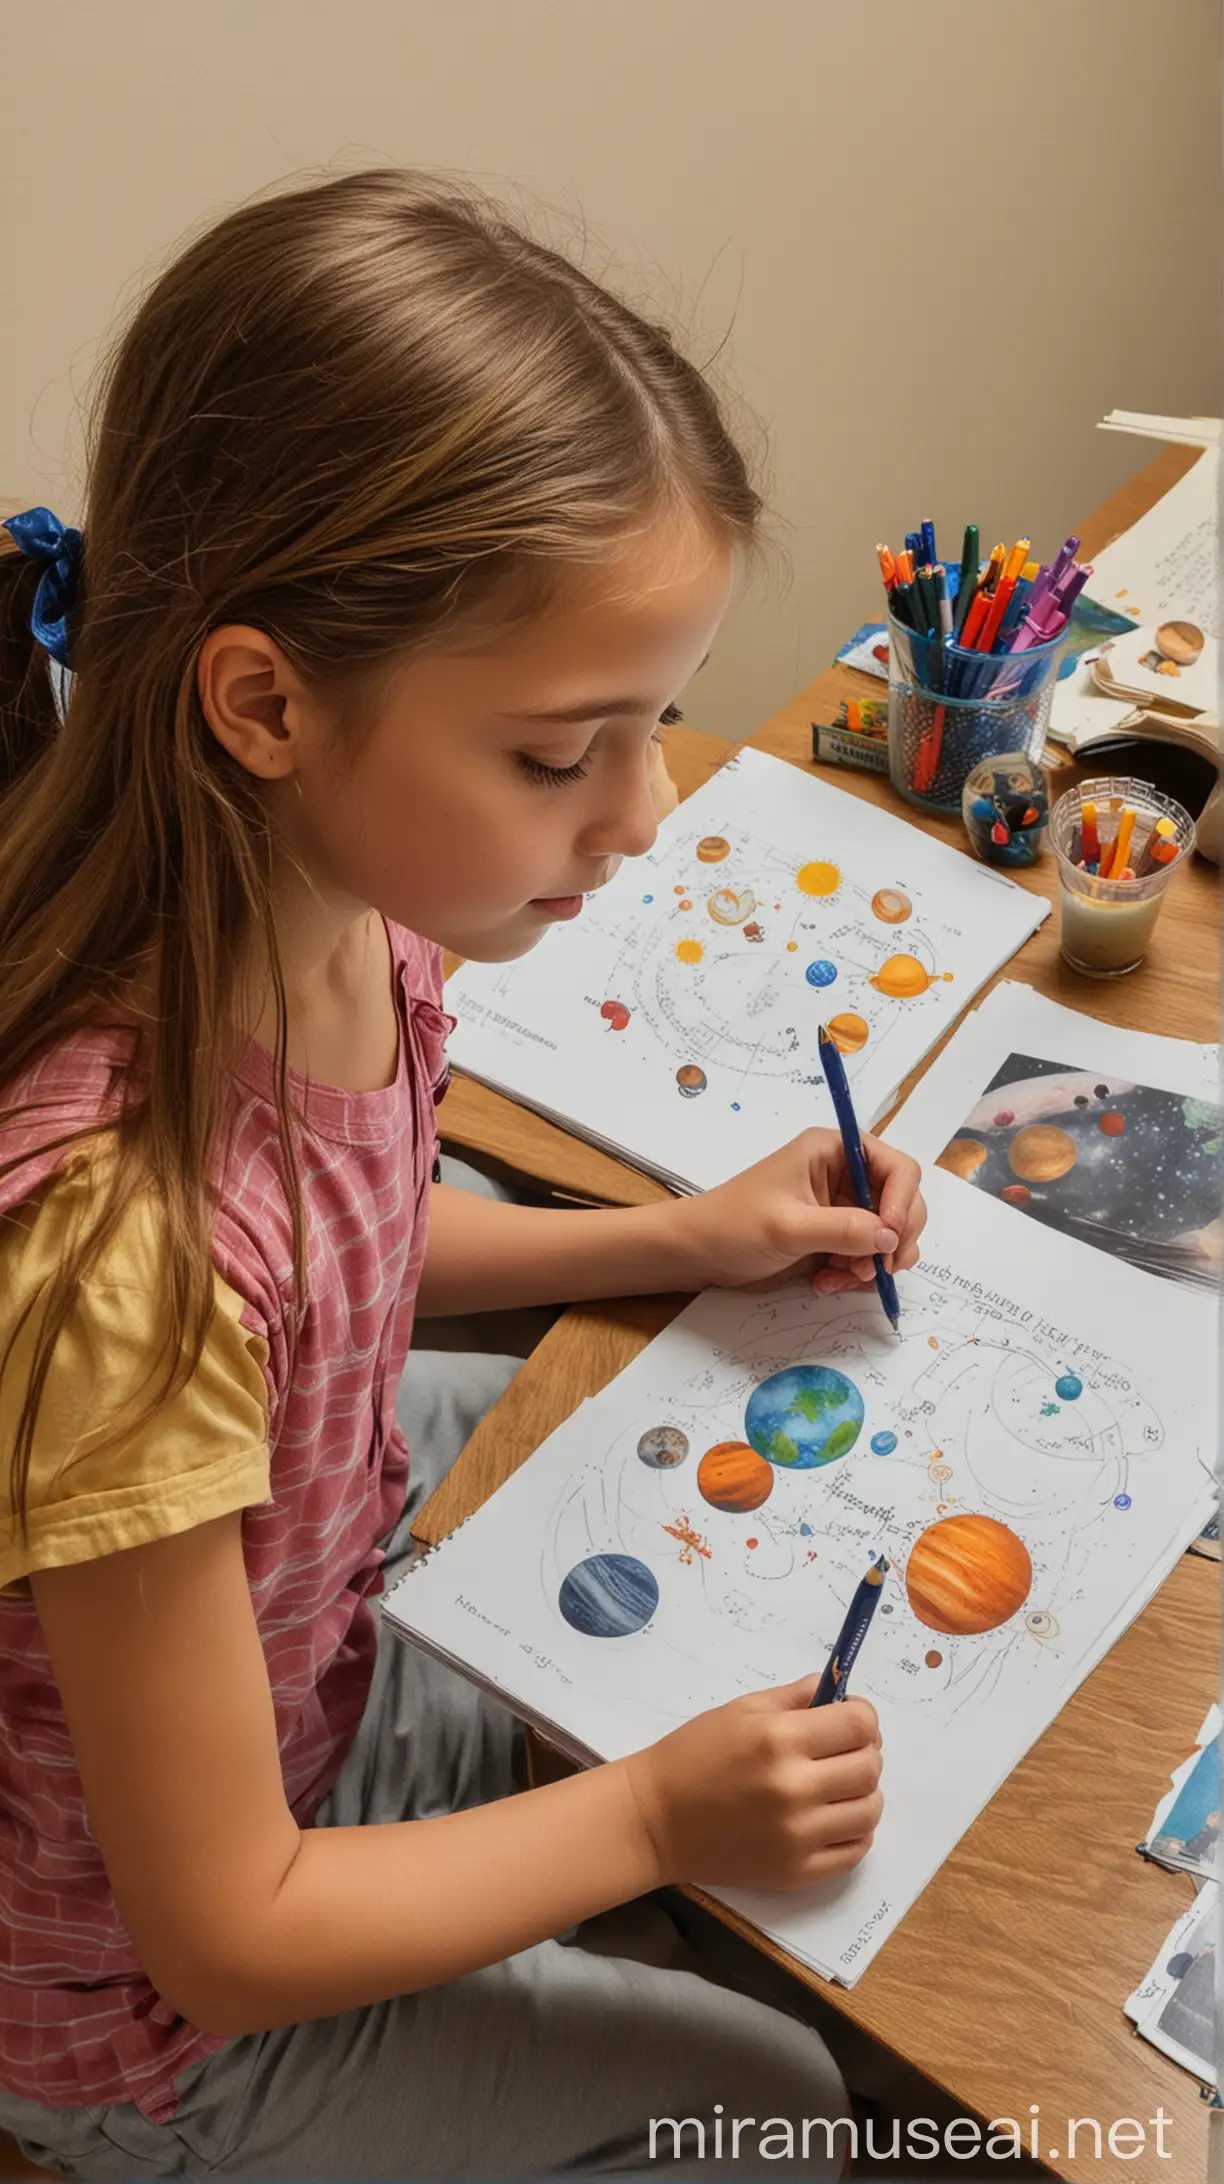 Young Girl Drawing Planets from Solar System Picture Book for Homework